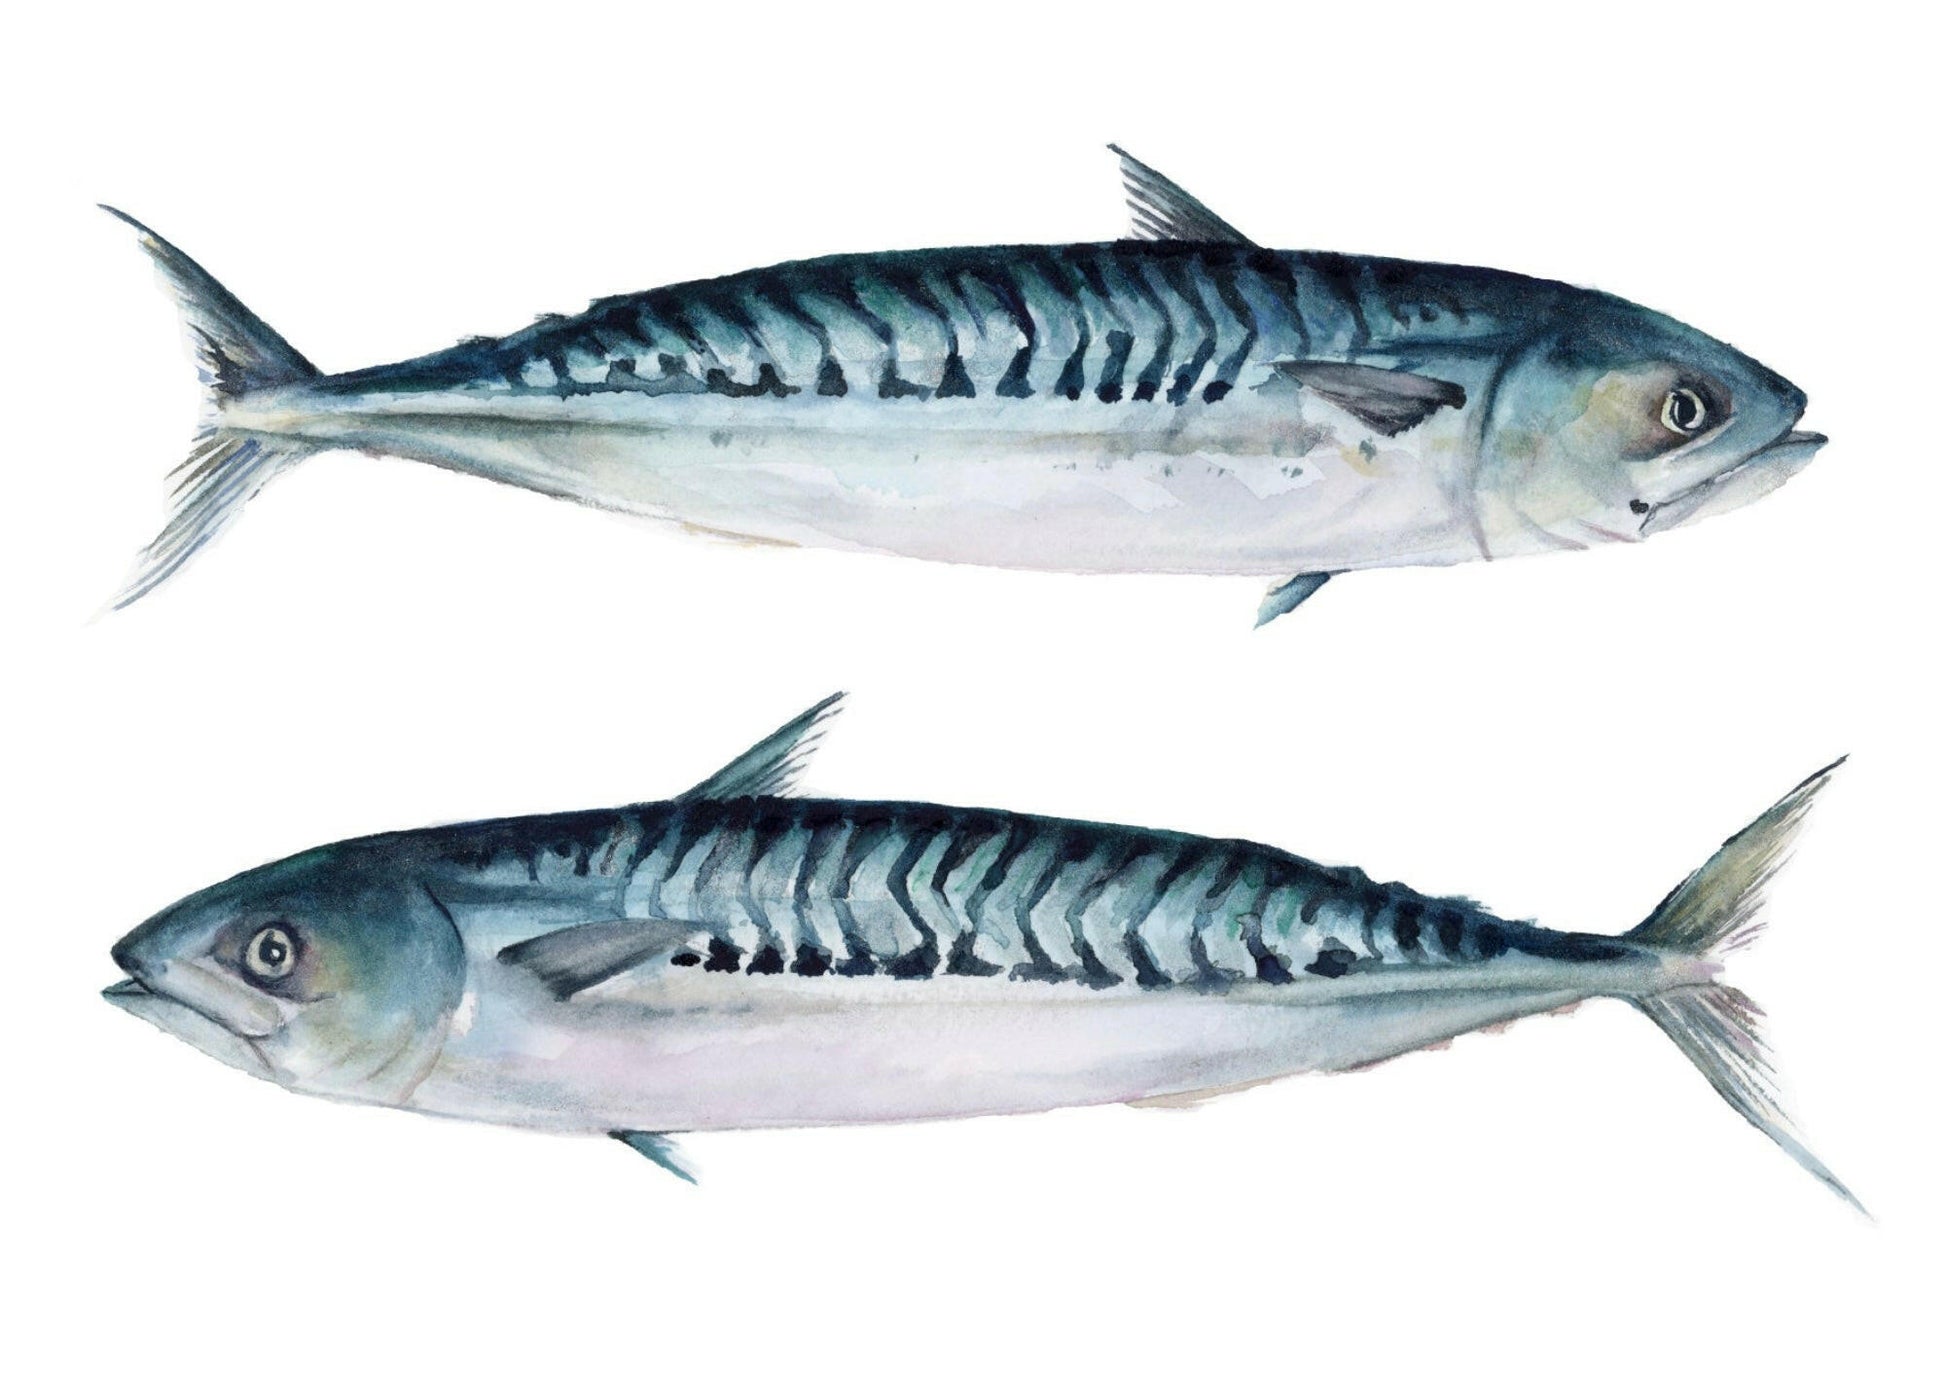 Image of two iridescent mackerels on a white background